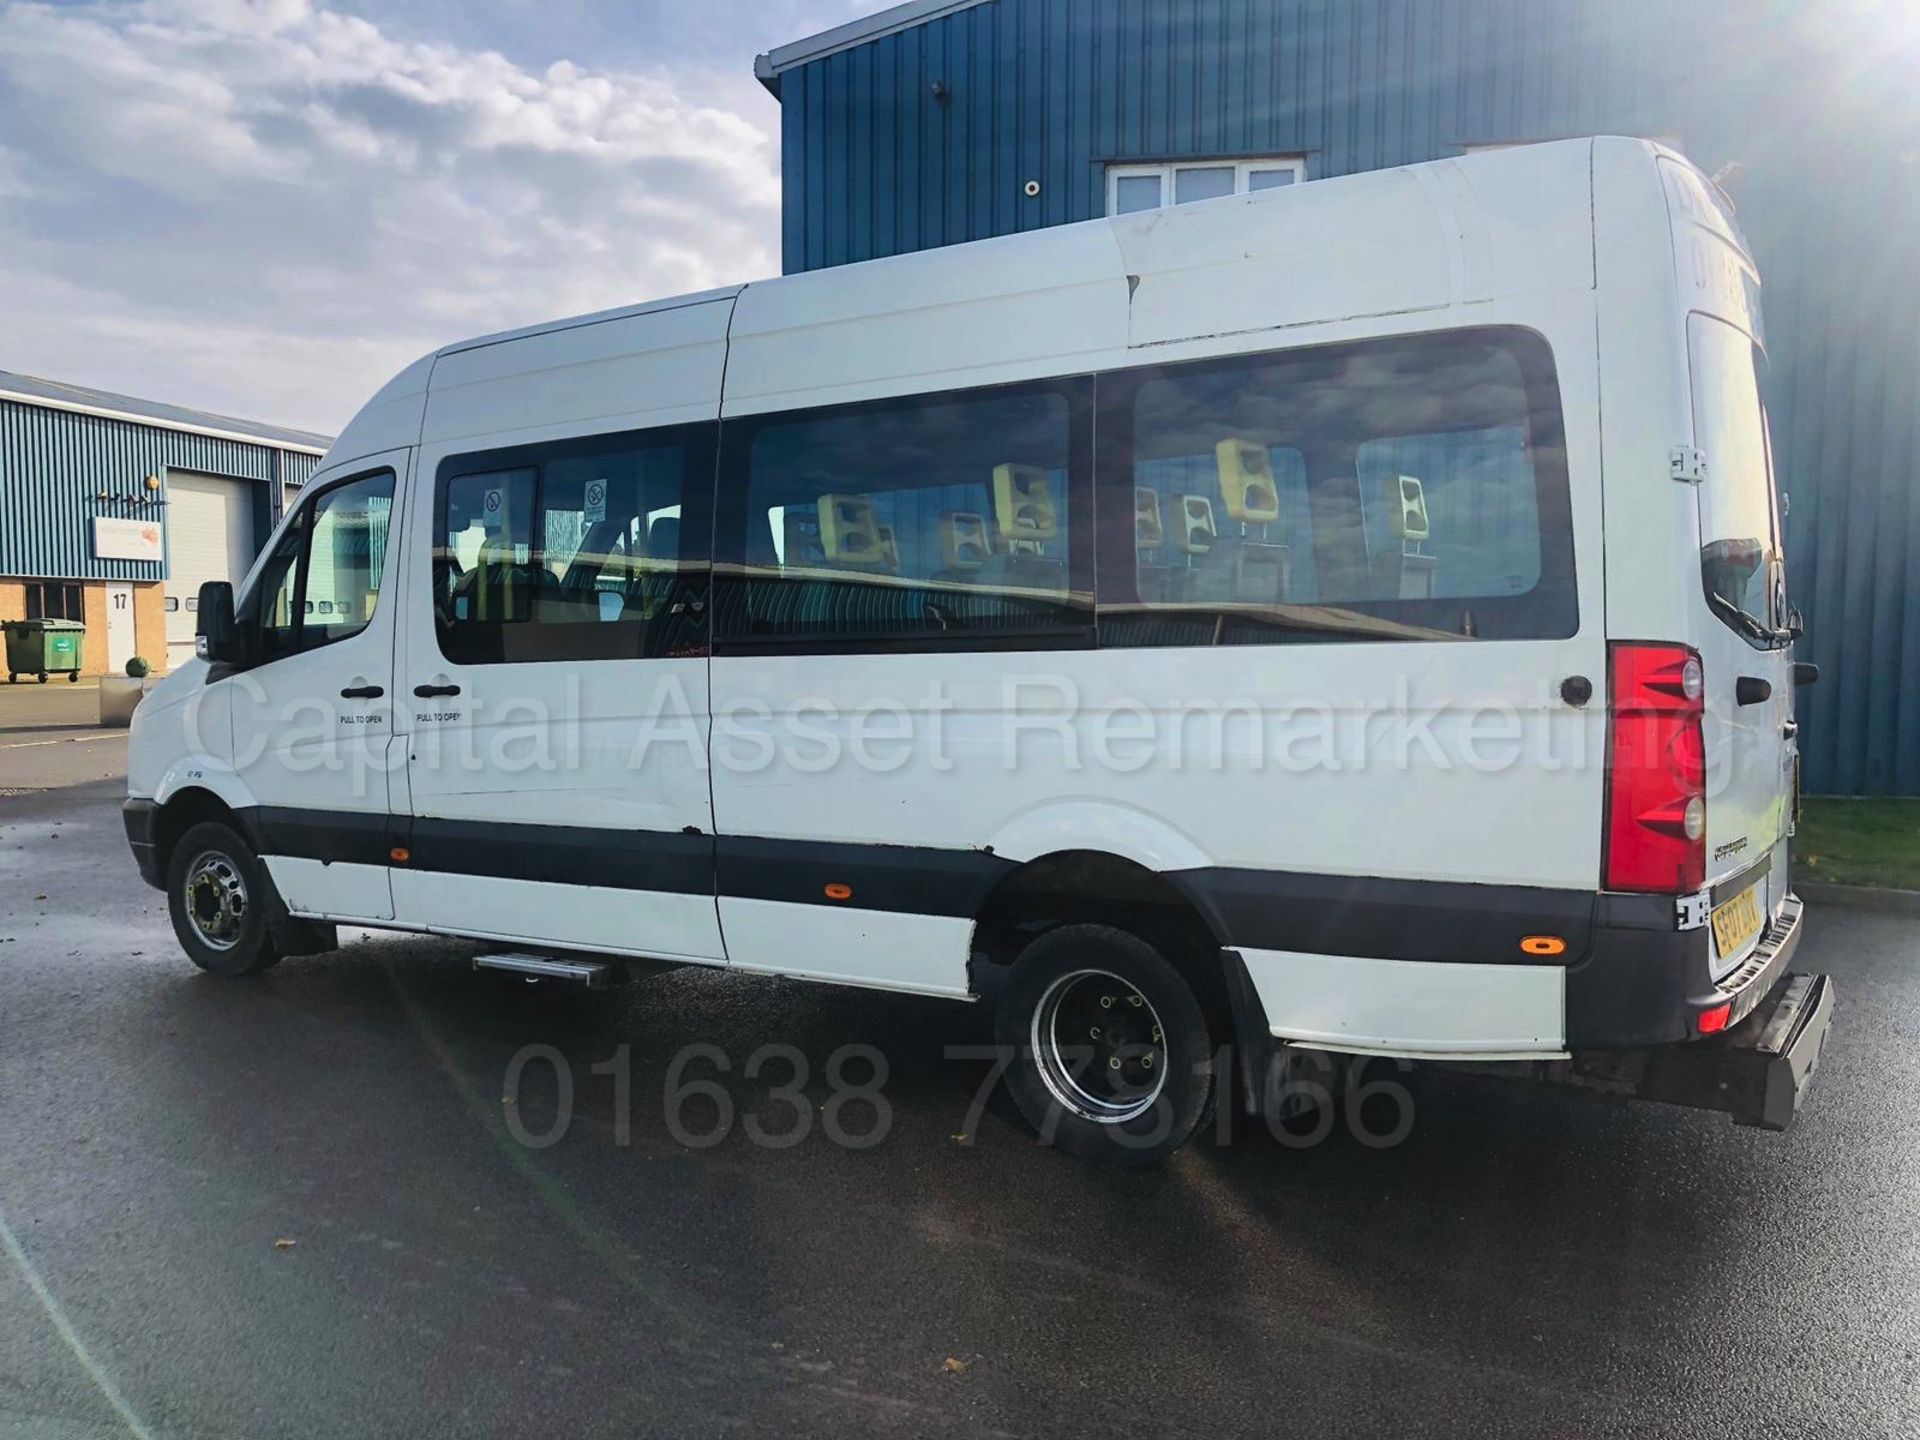 VOLKSWAGEN CRAFTER 2.5 TDI *LWB - 16 SEATER MINI-BUS / COACH* (2007) *ELECTRIC WHEEL CHAIR LIFT* - Image 12 of 38